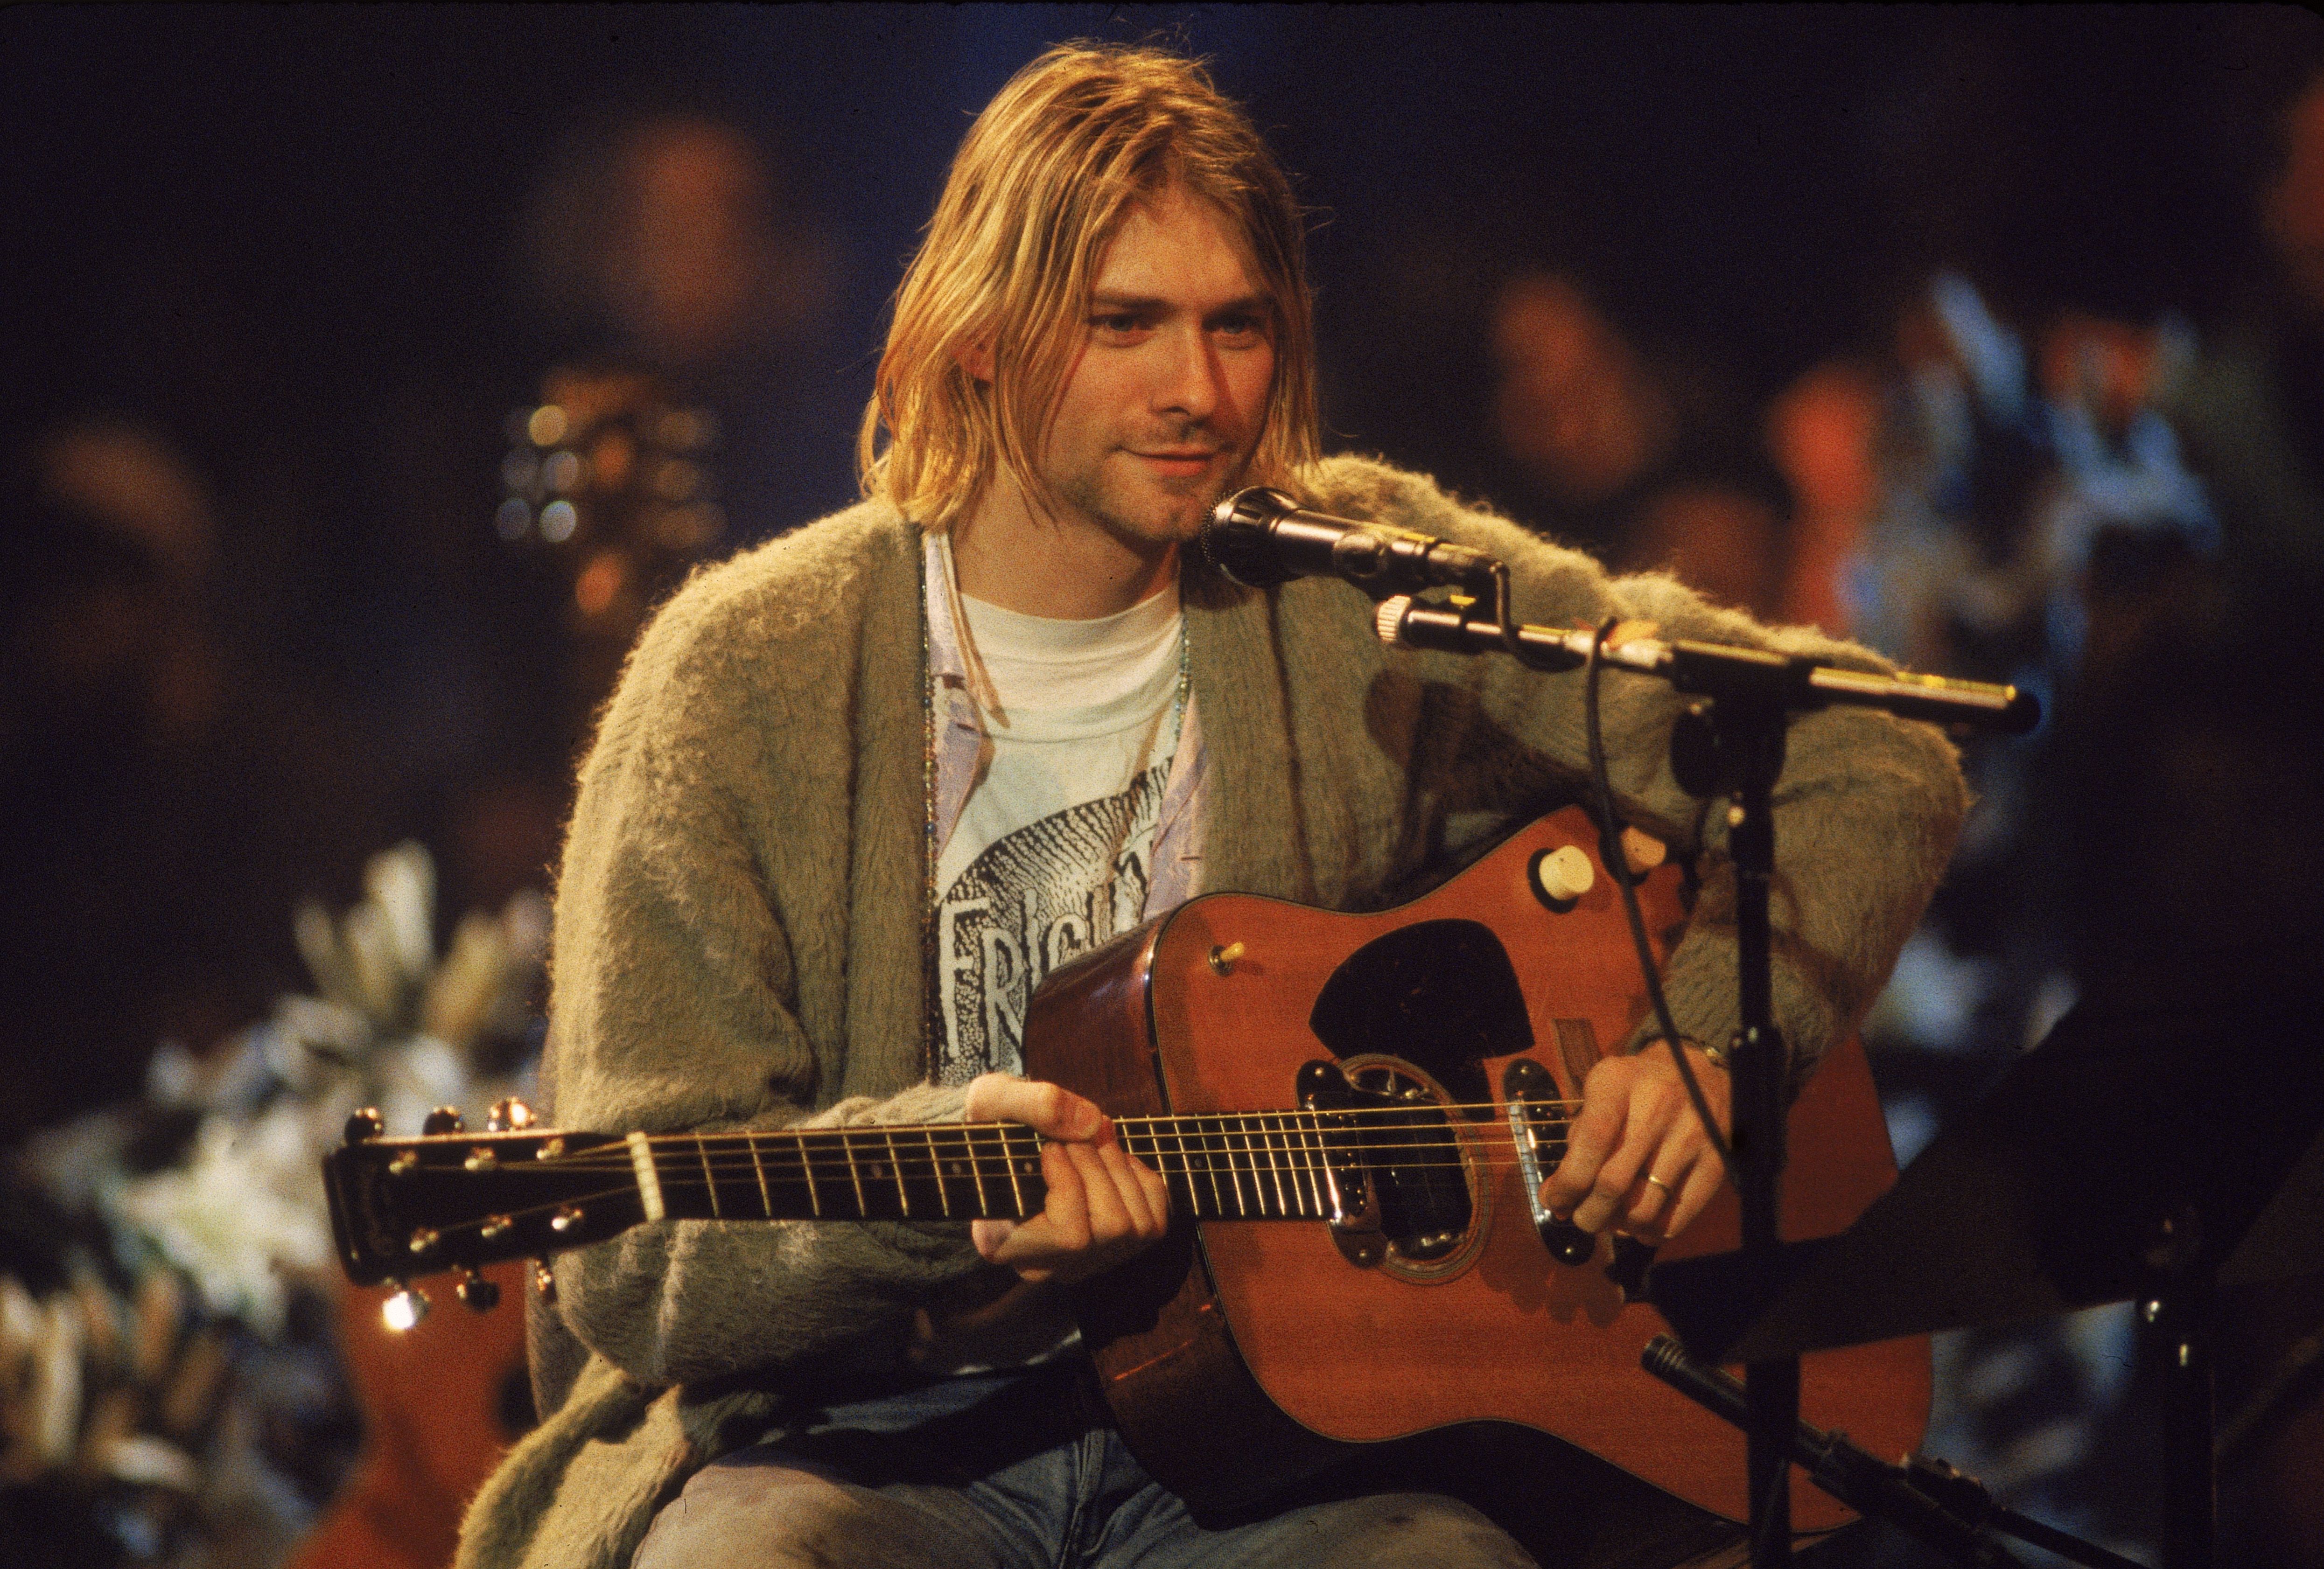  Kurt Cobain on 'MTV Unplugged,' in November 1993 in New York | Source: Getty Images